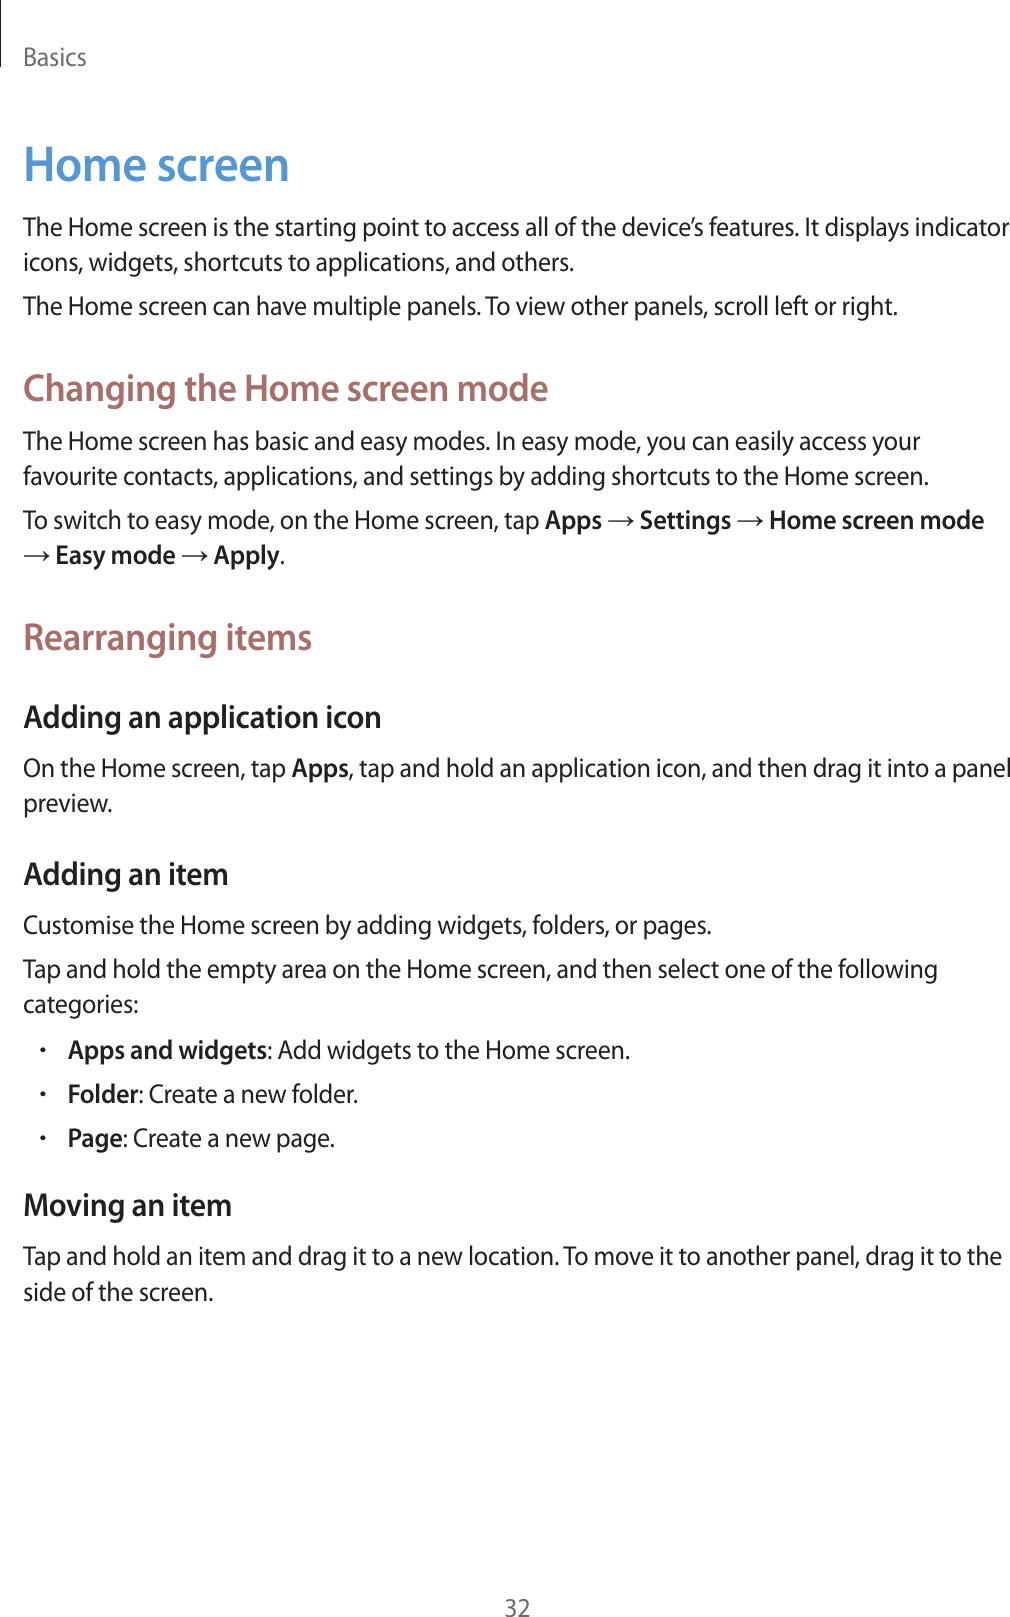 Basics32Home screenThe Home screen is the starting point to access all of the device’s features. It displays indicator icons, widgets, shortcuts to applications, and others.The Home screen can have multiple panels. To view other panels, scroll left or right.Changing the Home screen modeThe Home screen has basic and easy modes. In easy mode, you can easily access your favourite contacts, applications, and settings by adding shortcuts to the Home screen.To switch to easy mode, on the Home screen, tap Apps ĺ Settings ĺ Home screen mode ĺ Easy mode ĺ Apply.Rearranging itemsAdding an application iconOn the Home screen, tap Apps, tap and hold an application icon, and then drag it into a panel preview.Adding an itemCustomise the Home screen by adding widgets, folders, or pages.Tap and hold the empty area on the Home screen, and then select one of the following categories:rApps and widgets: Add widgets to the Home screen.rFolder: Create a new folder.rPage: Create a new page.Moving an itemTap and hold an item and drag it to a new location. To move it to another panel, drag it to the side of the screen.